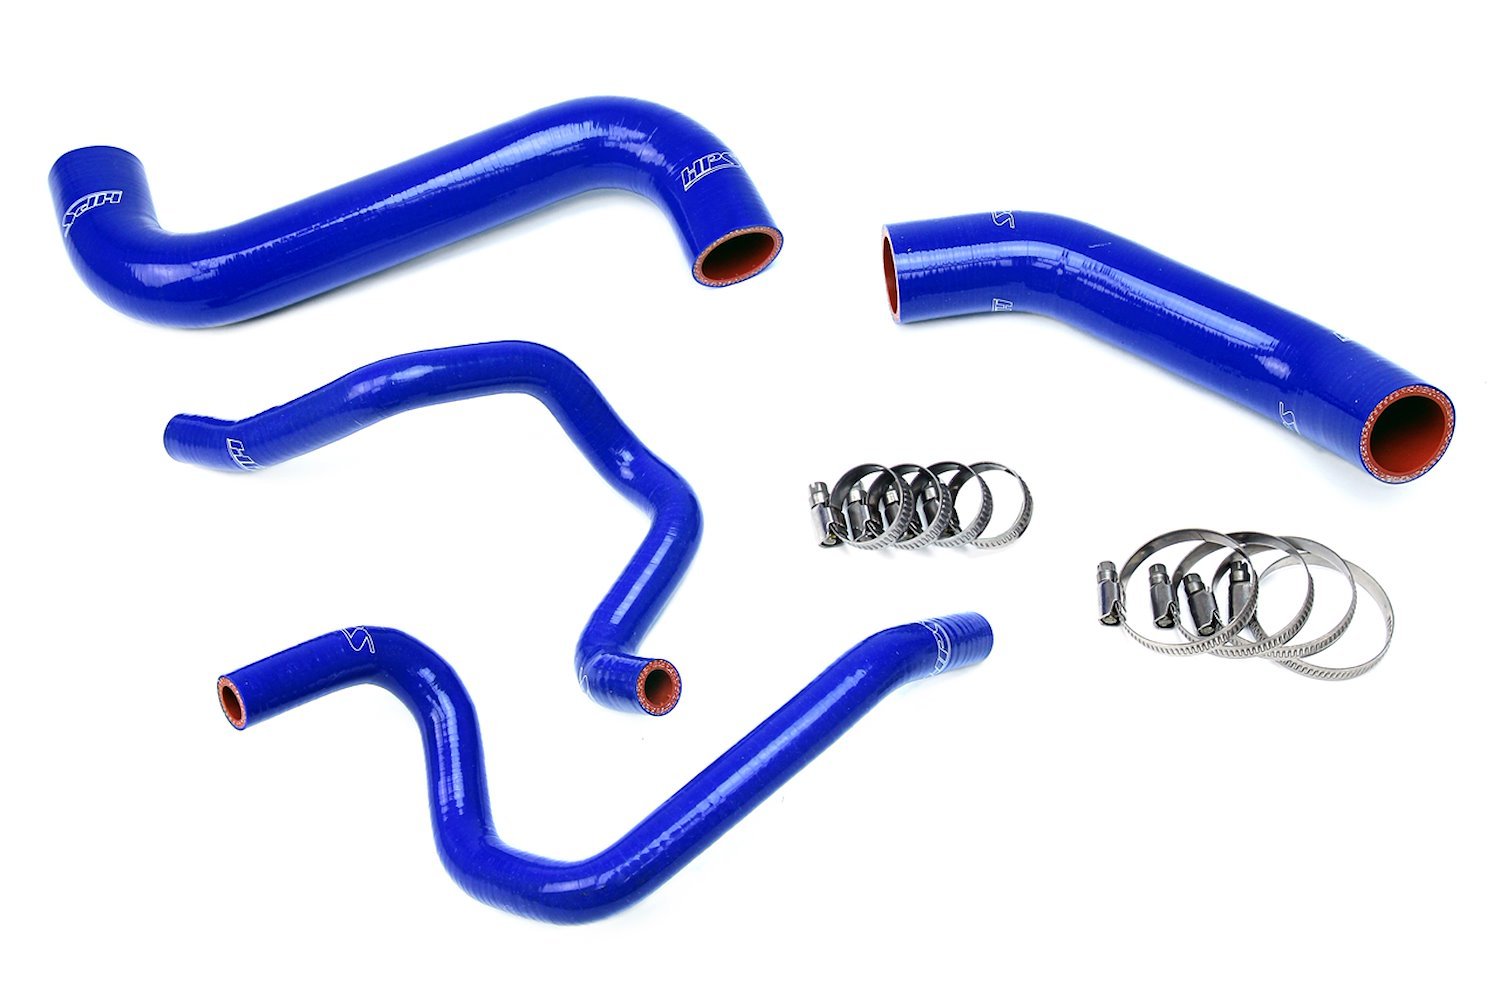 57-1732-BLUE Coolant Hose Kit, High-Temp 3-Ply Reinforced Silicone, Replace Rubber Radiator Heater Coolant Hoses